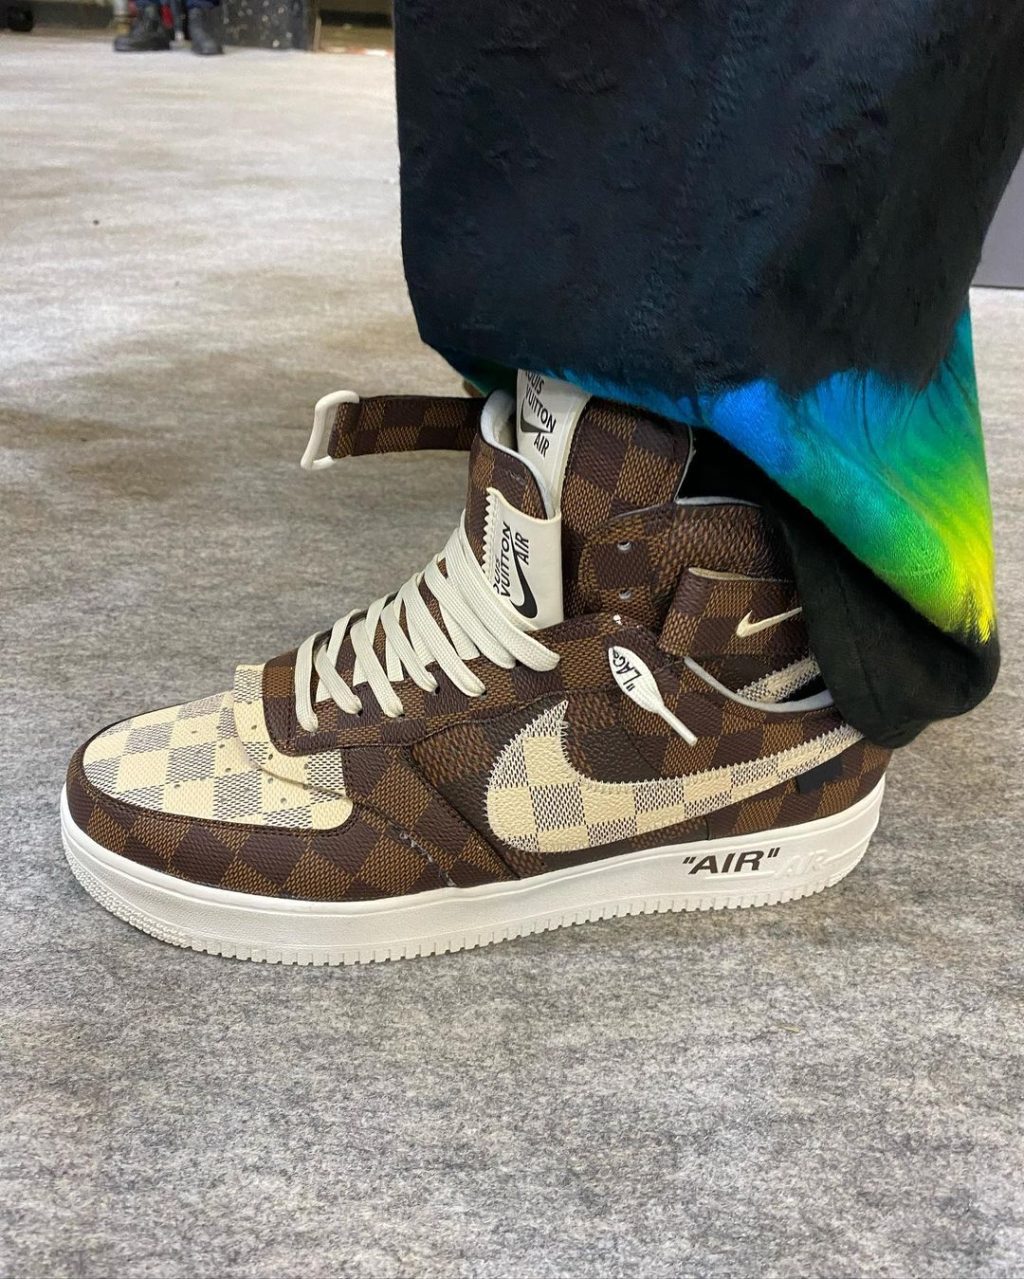 LOUIS VUITTON × NIKE AIR FORCE 1 LOW  MID 9モデルが7/19に国内発売予定 | God Meets  Fashion